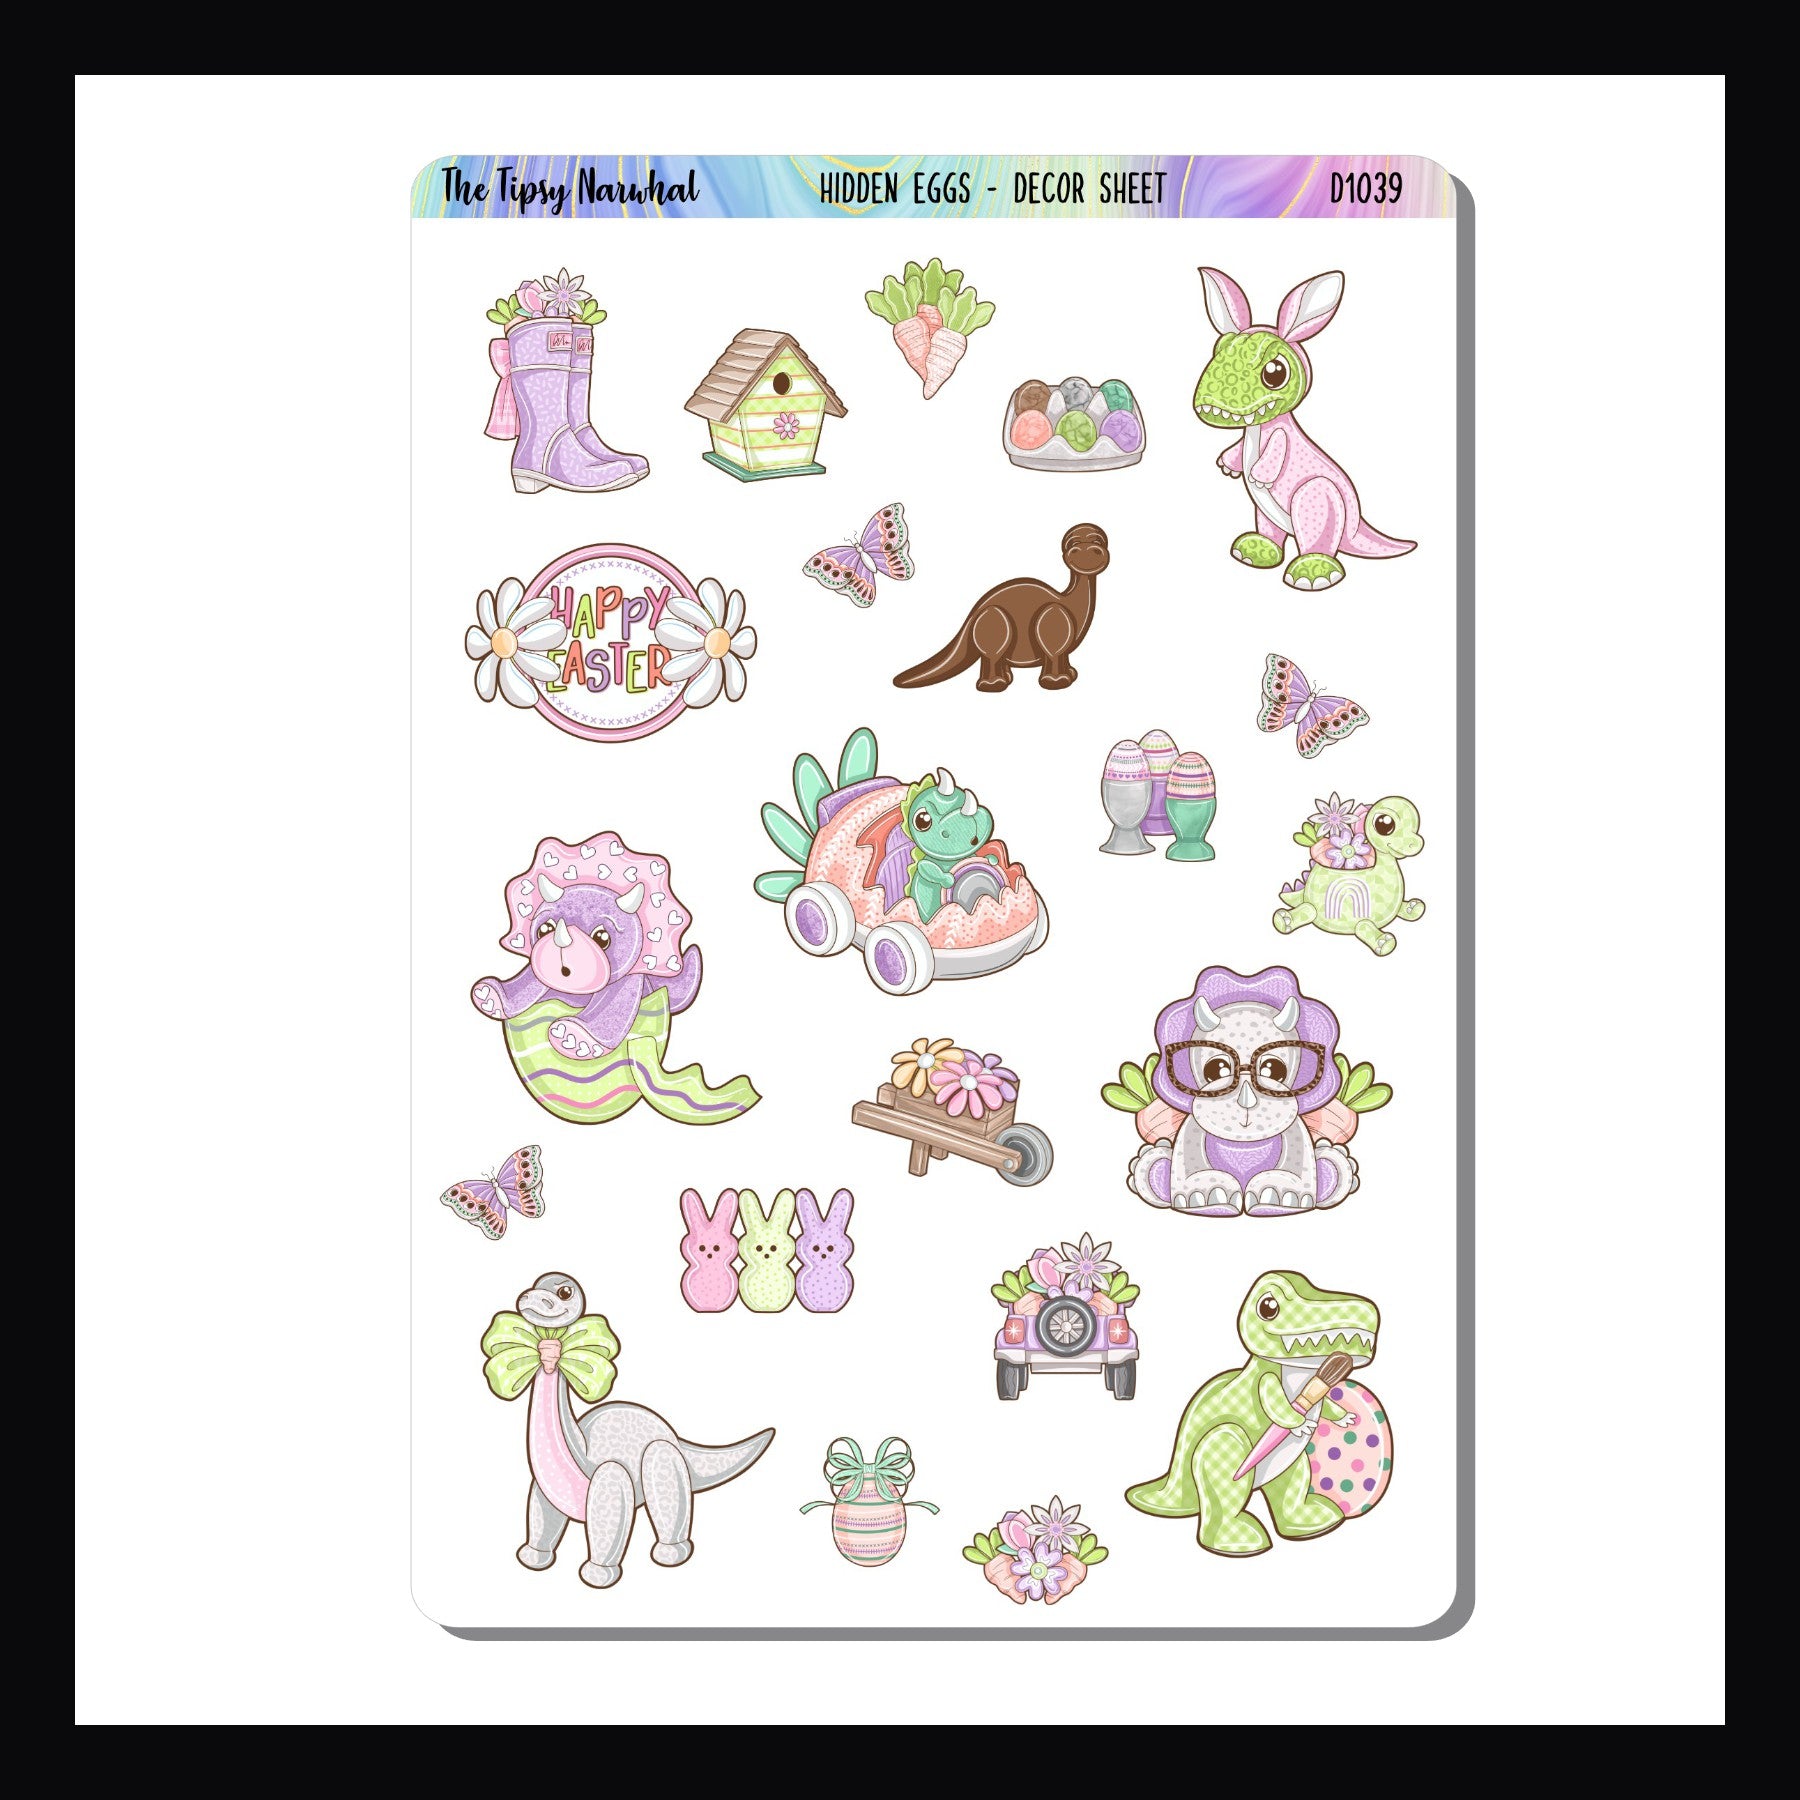 Hidden Eggs Hobonichi Cousin Kit Decor Sheet.  Decor sheet features several dinosaur themed Easter stickers including eggs, flowers, candy and butterflies. 